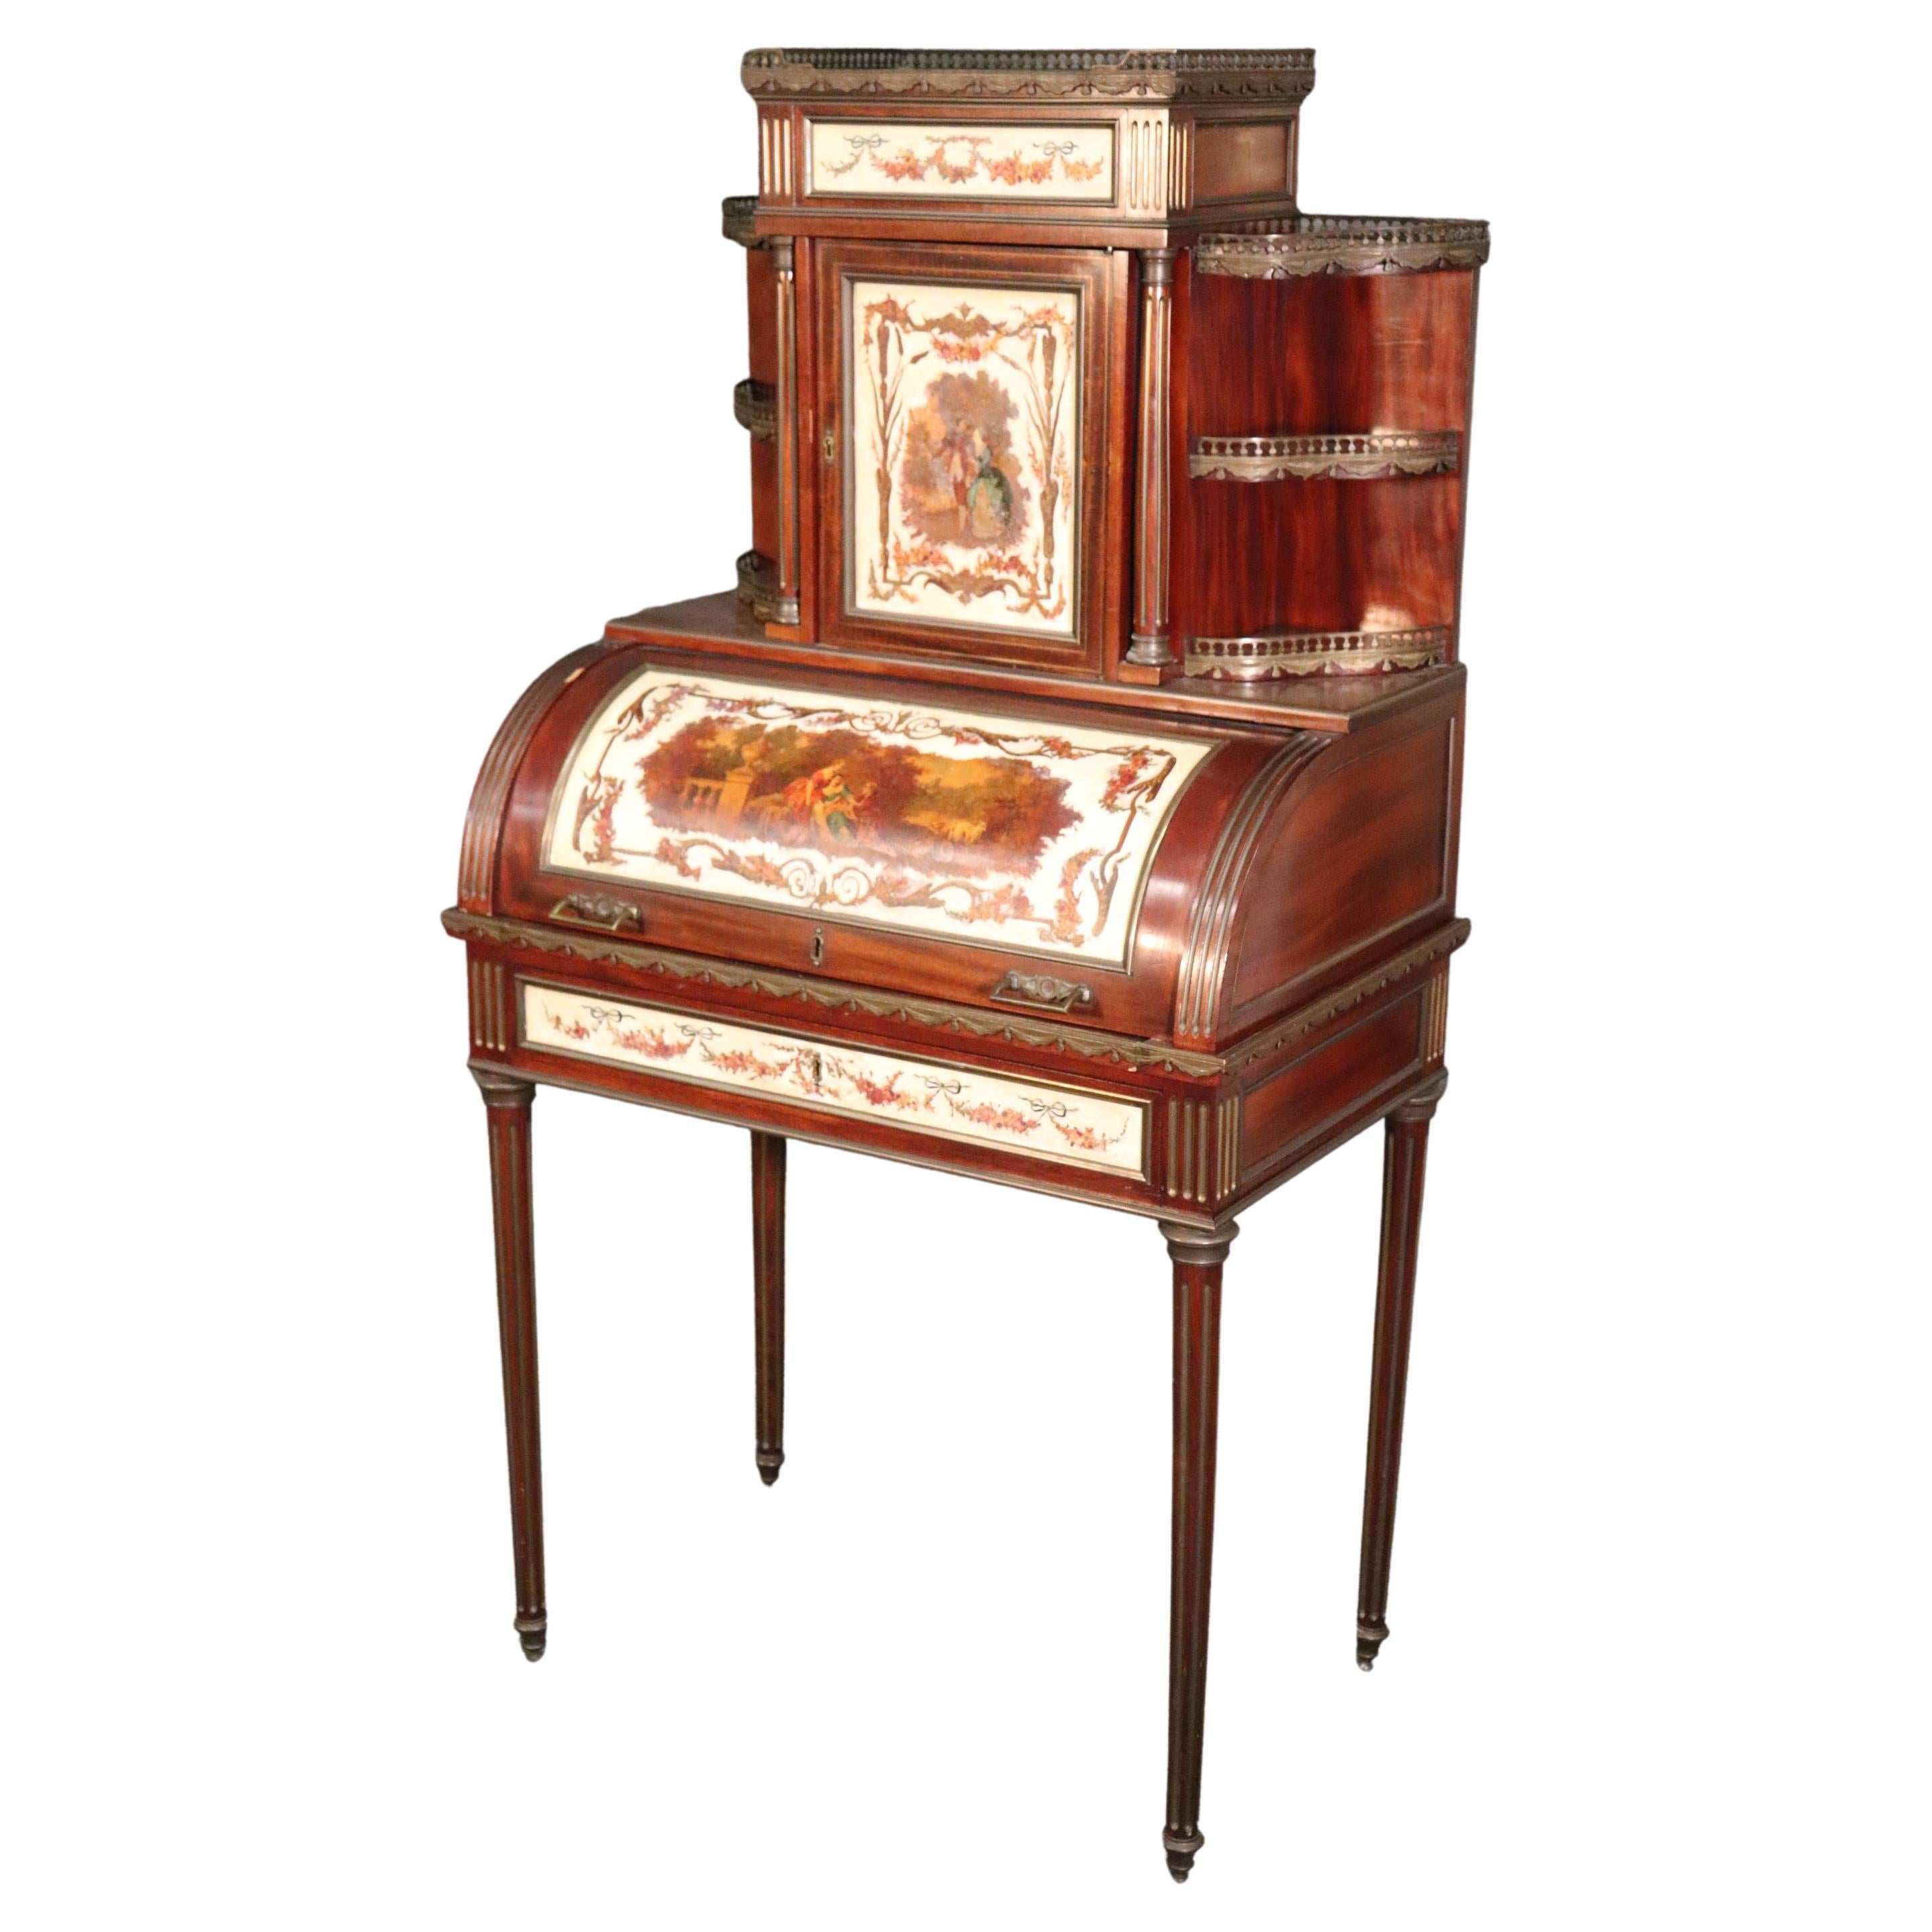 Important French Brass Inlaid Paint Decorated Rolltop Ladies Writing Desk For Sale